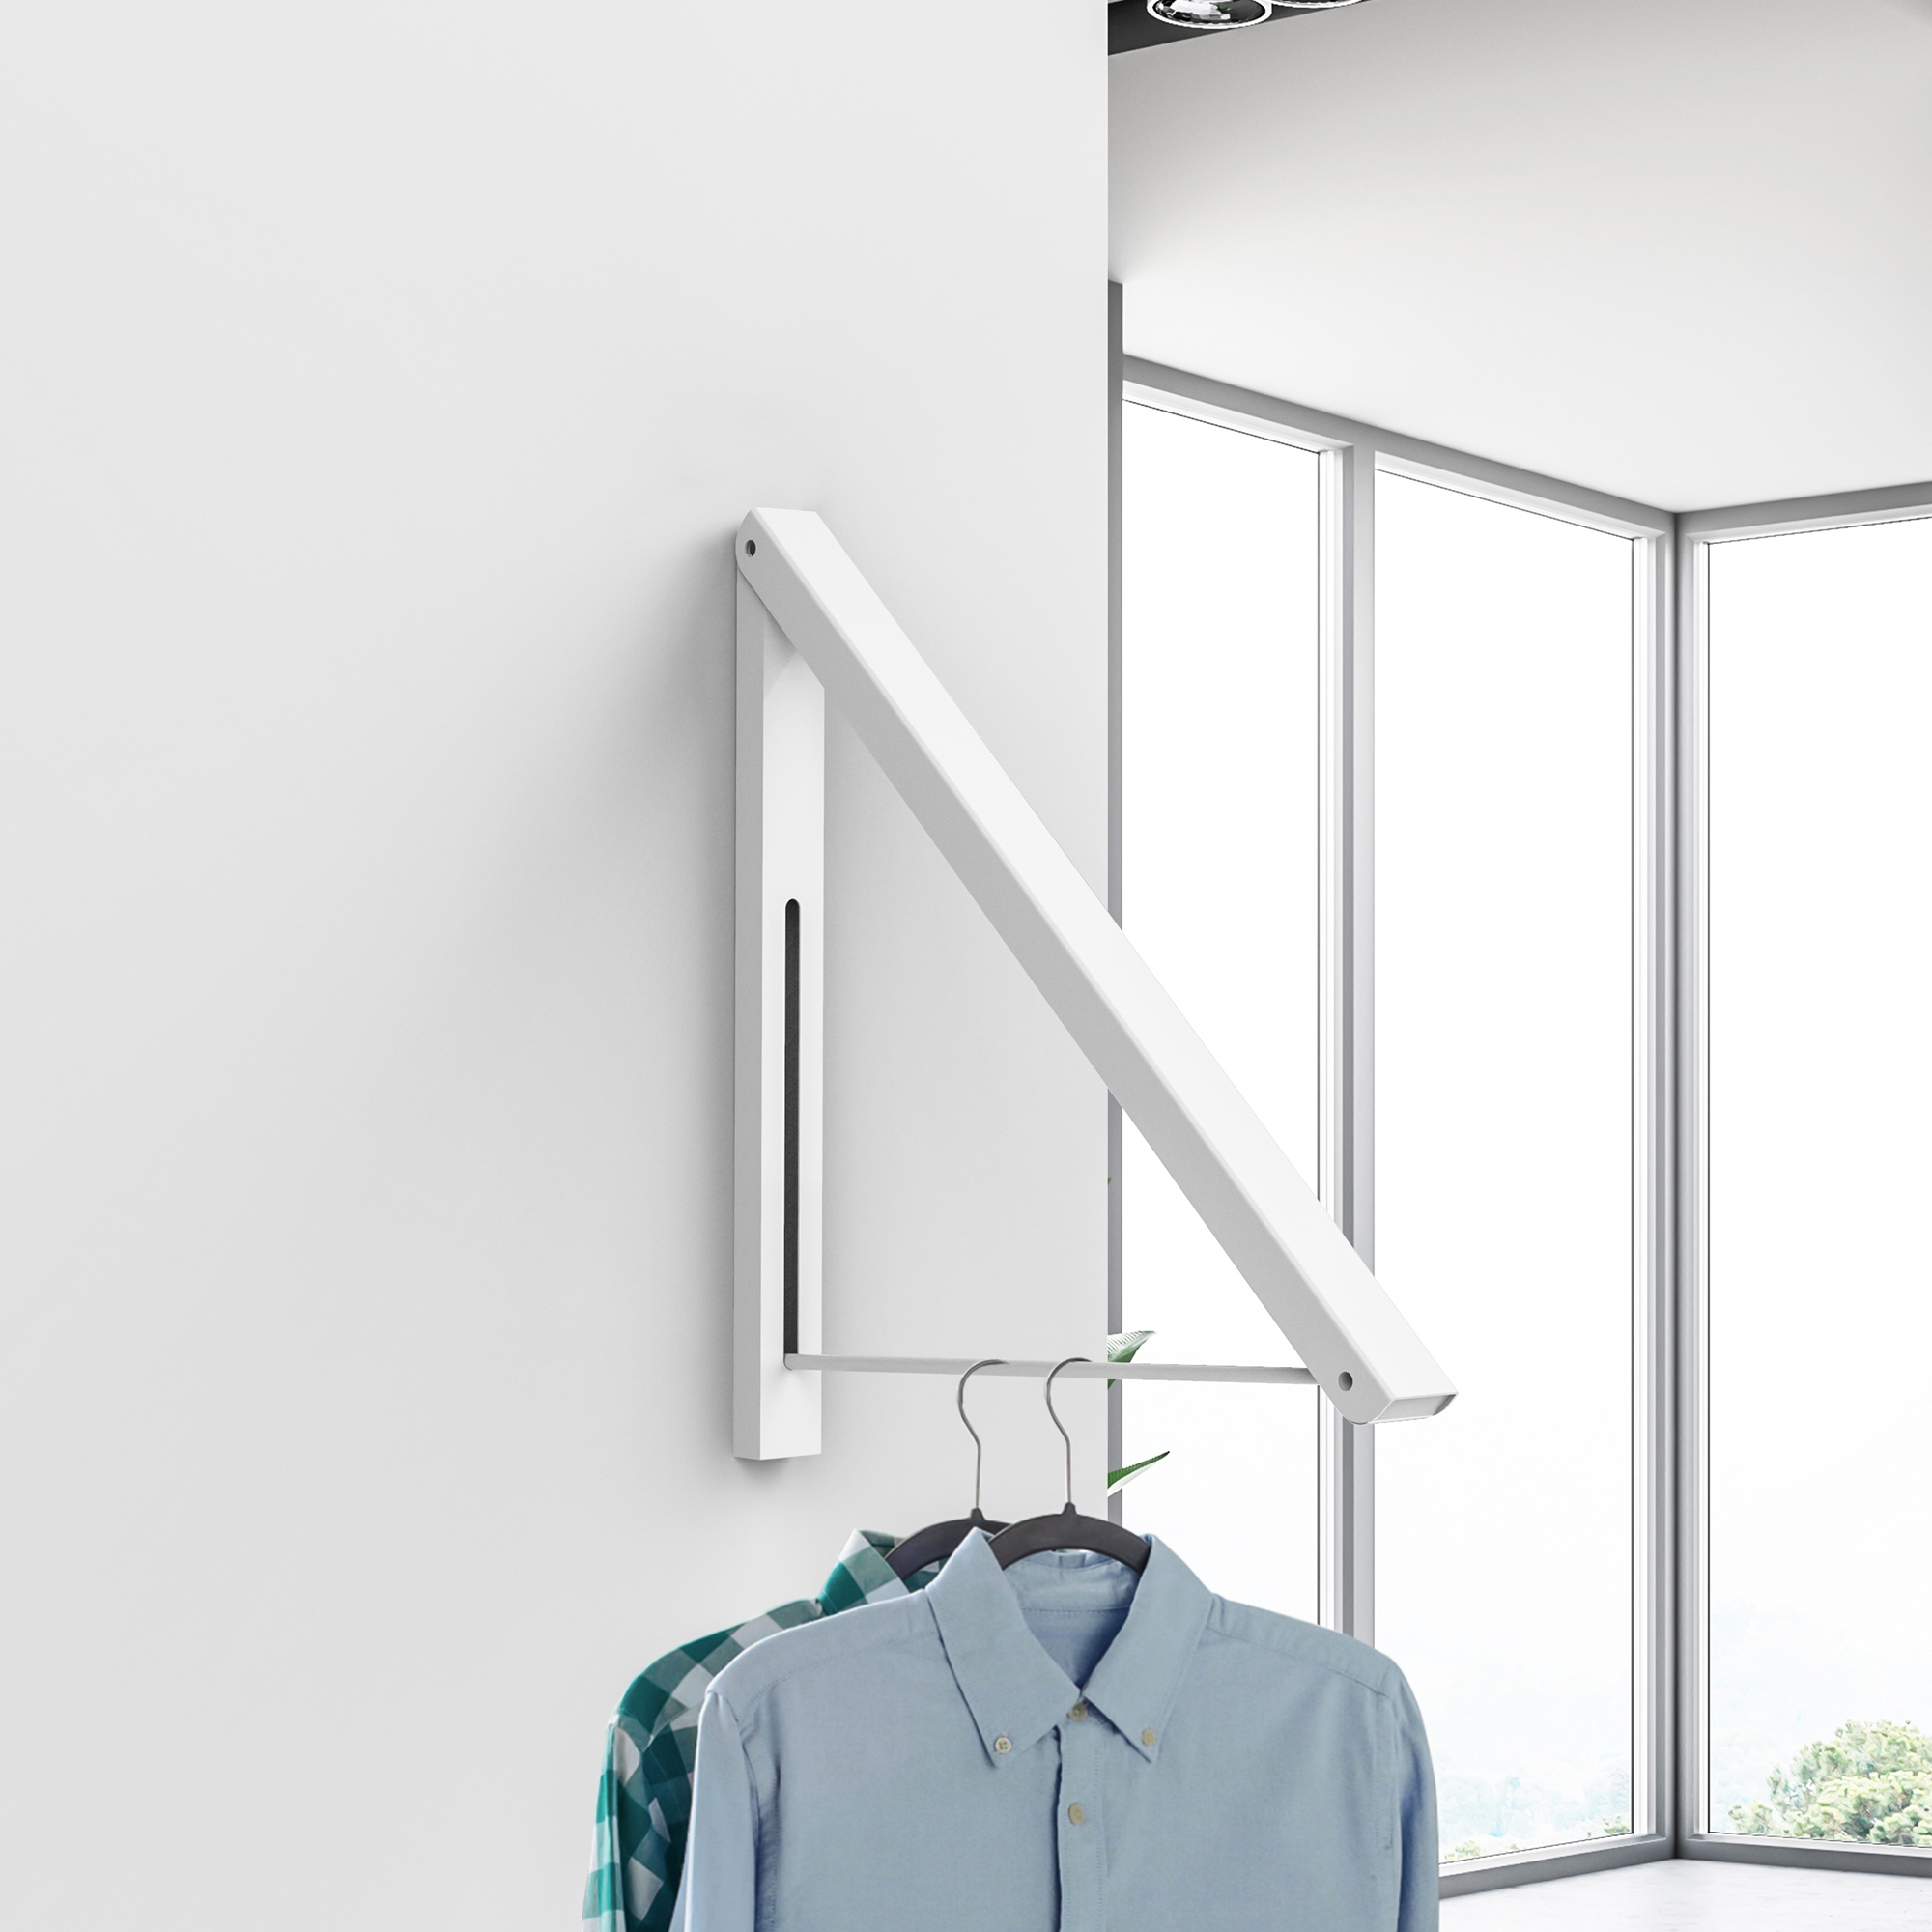 Butlers Suite Wall Mount Clothes Hanger Image 2